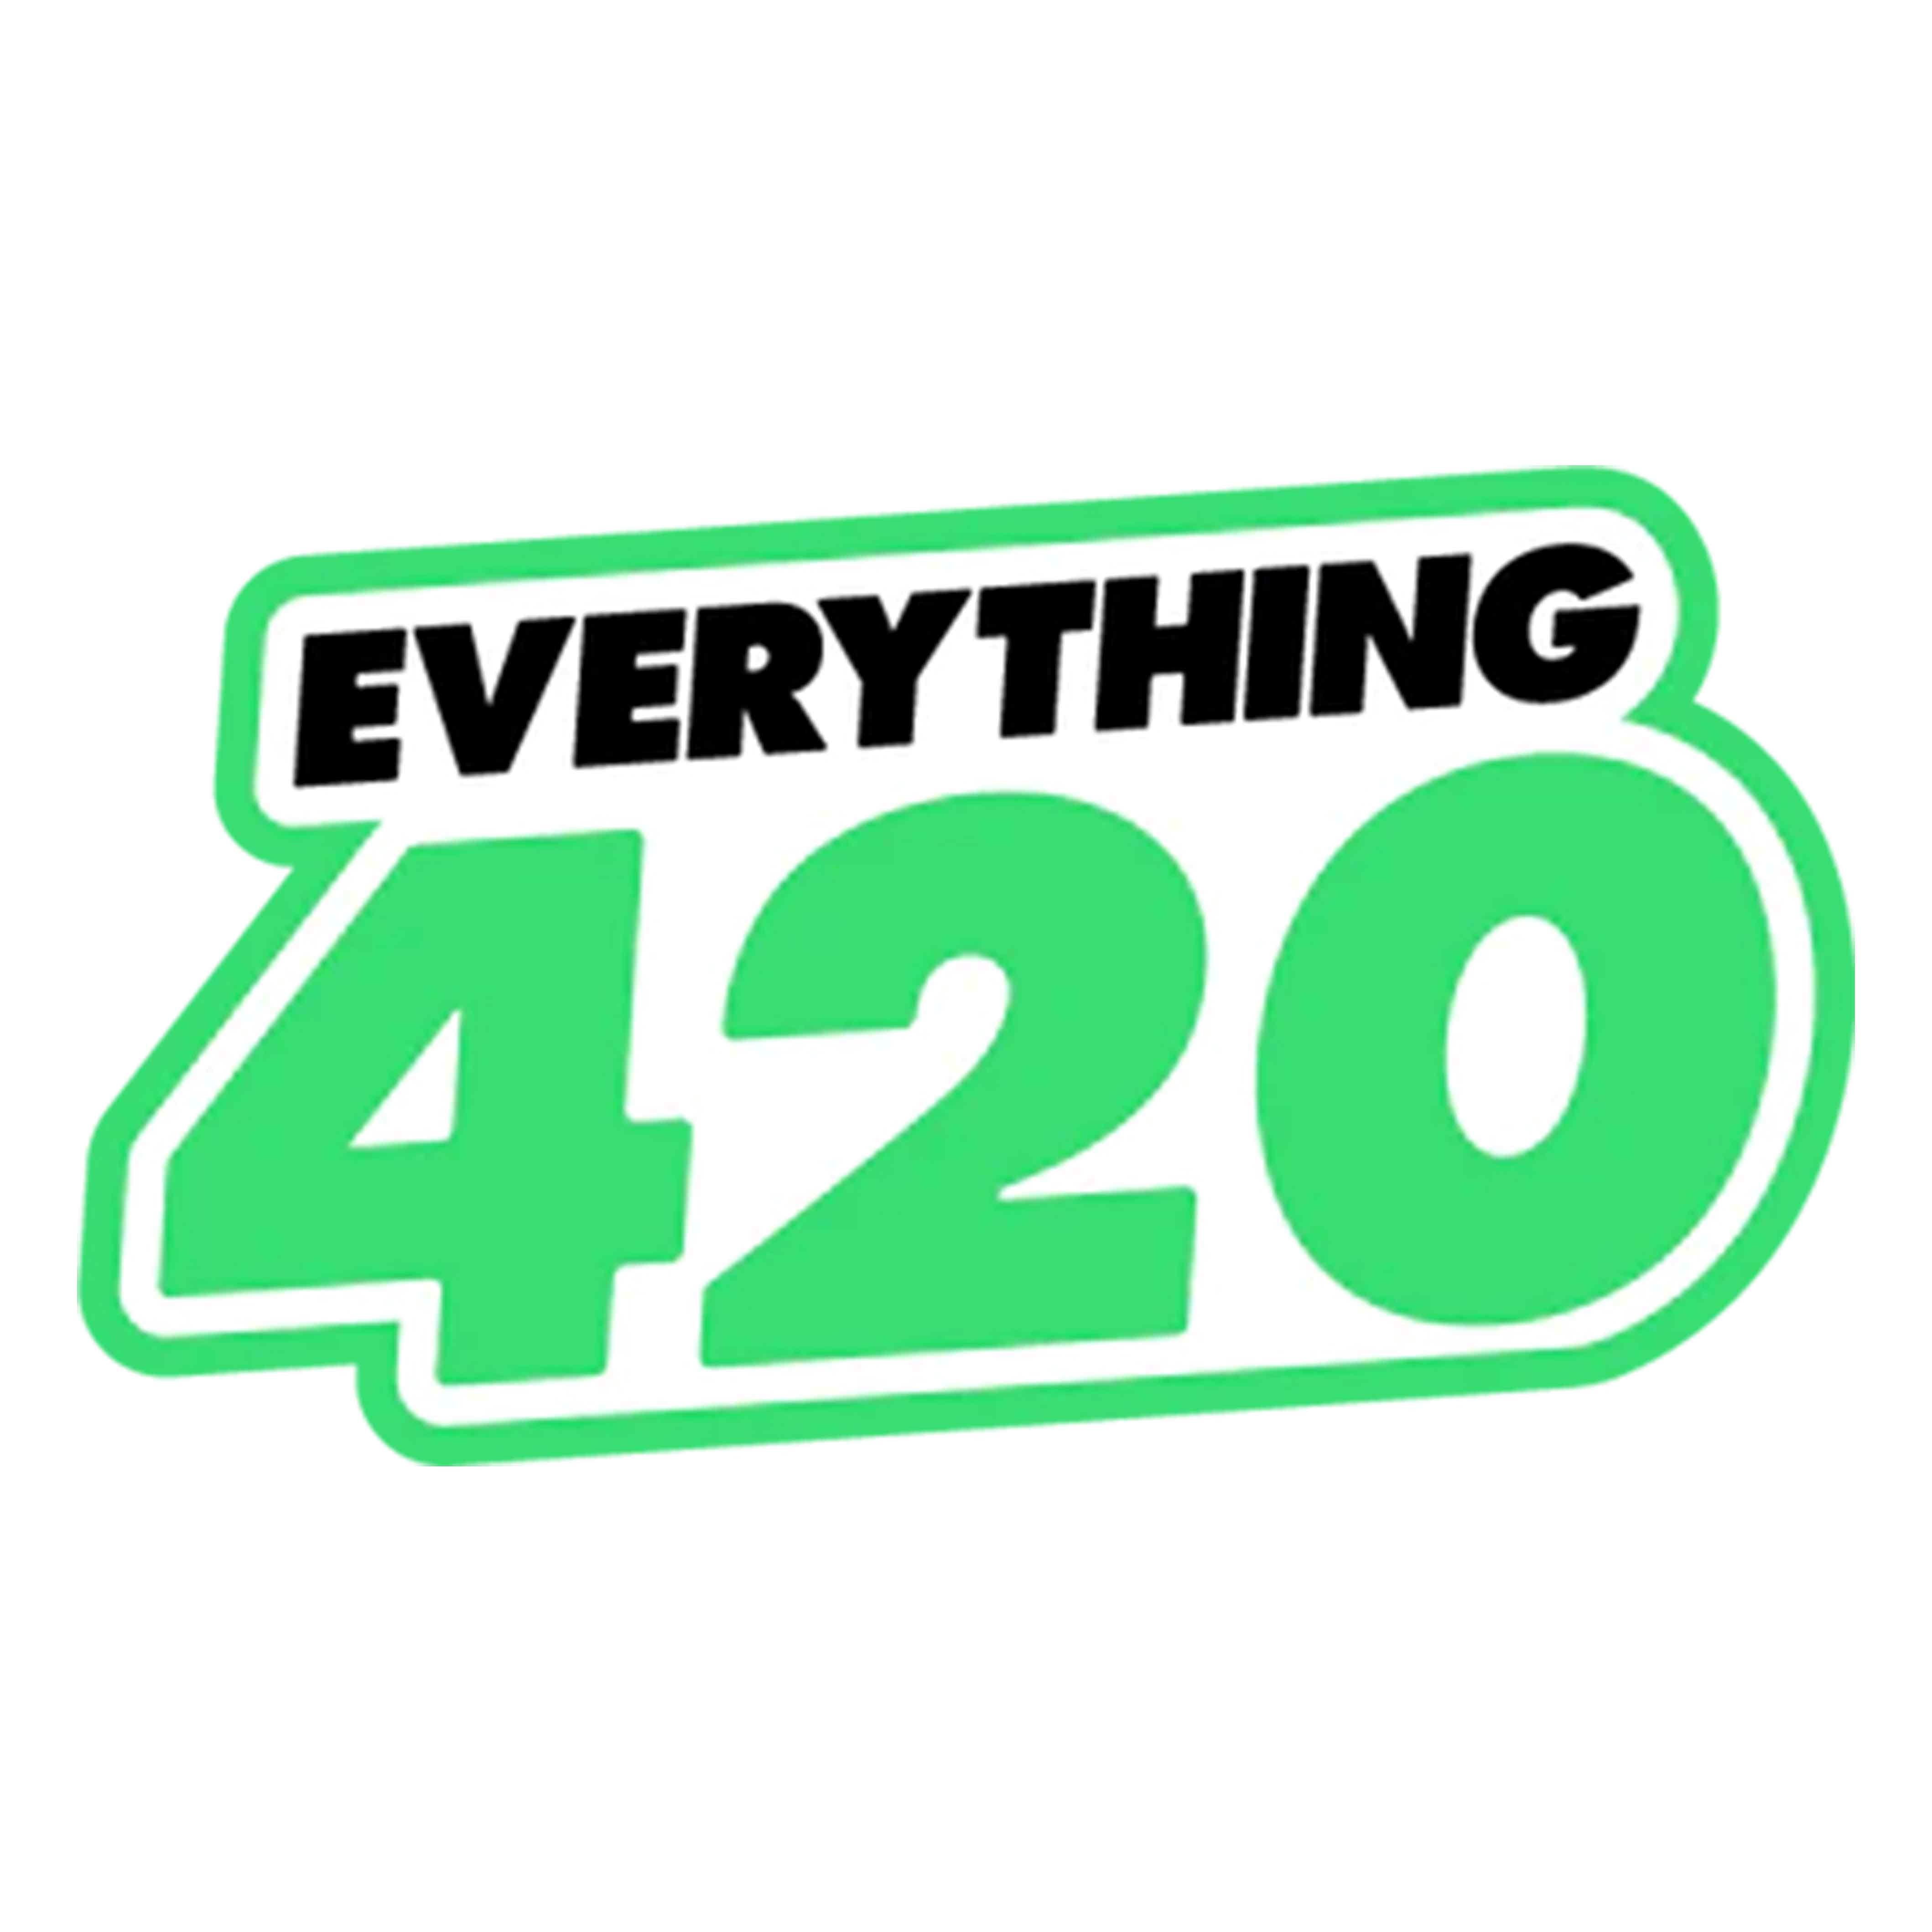 Everything For 420 promo codes